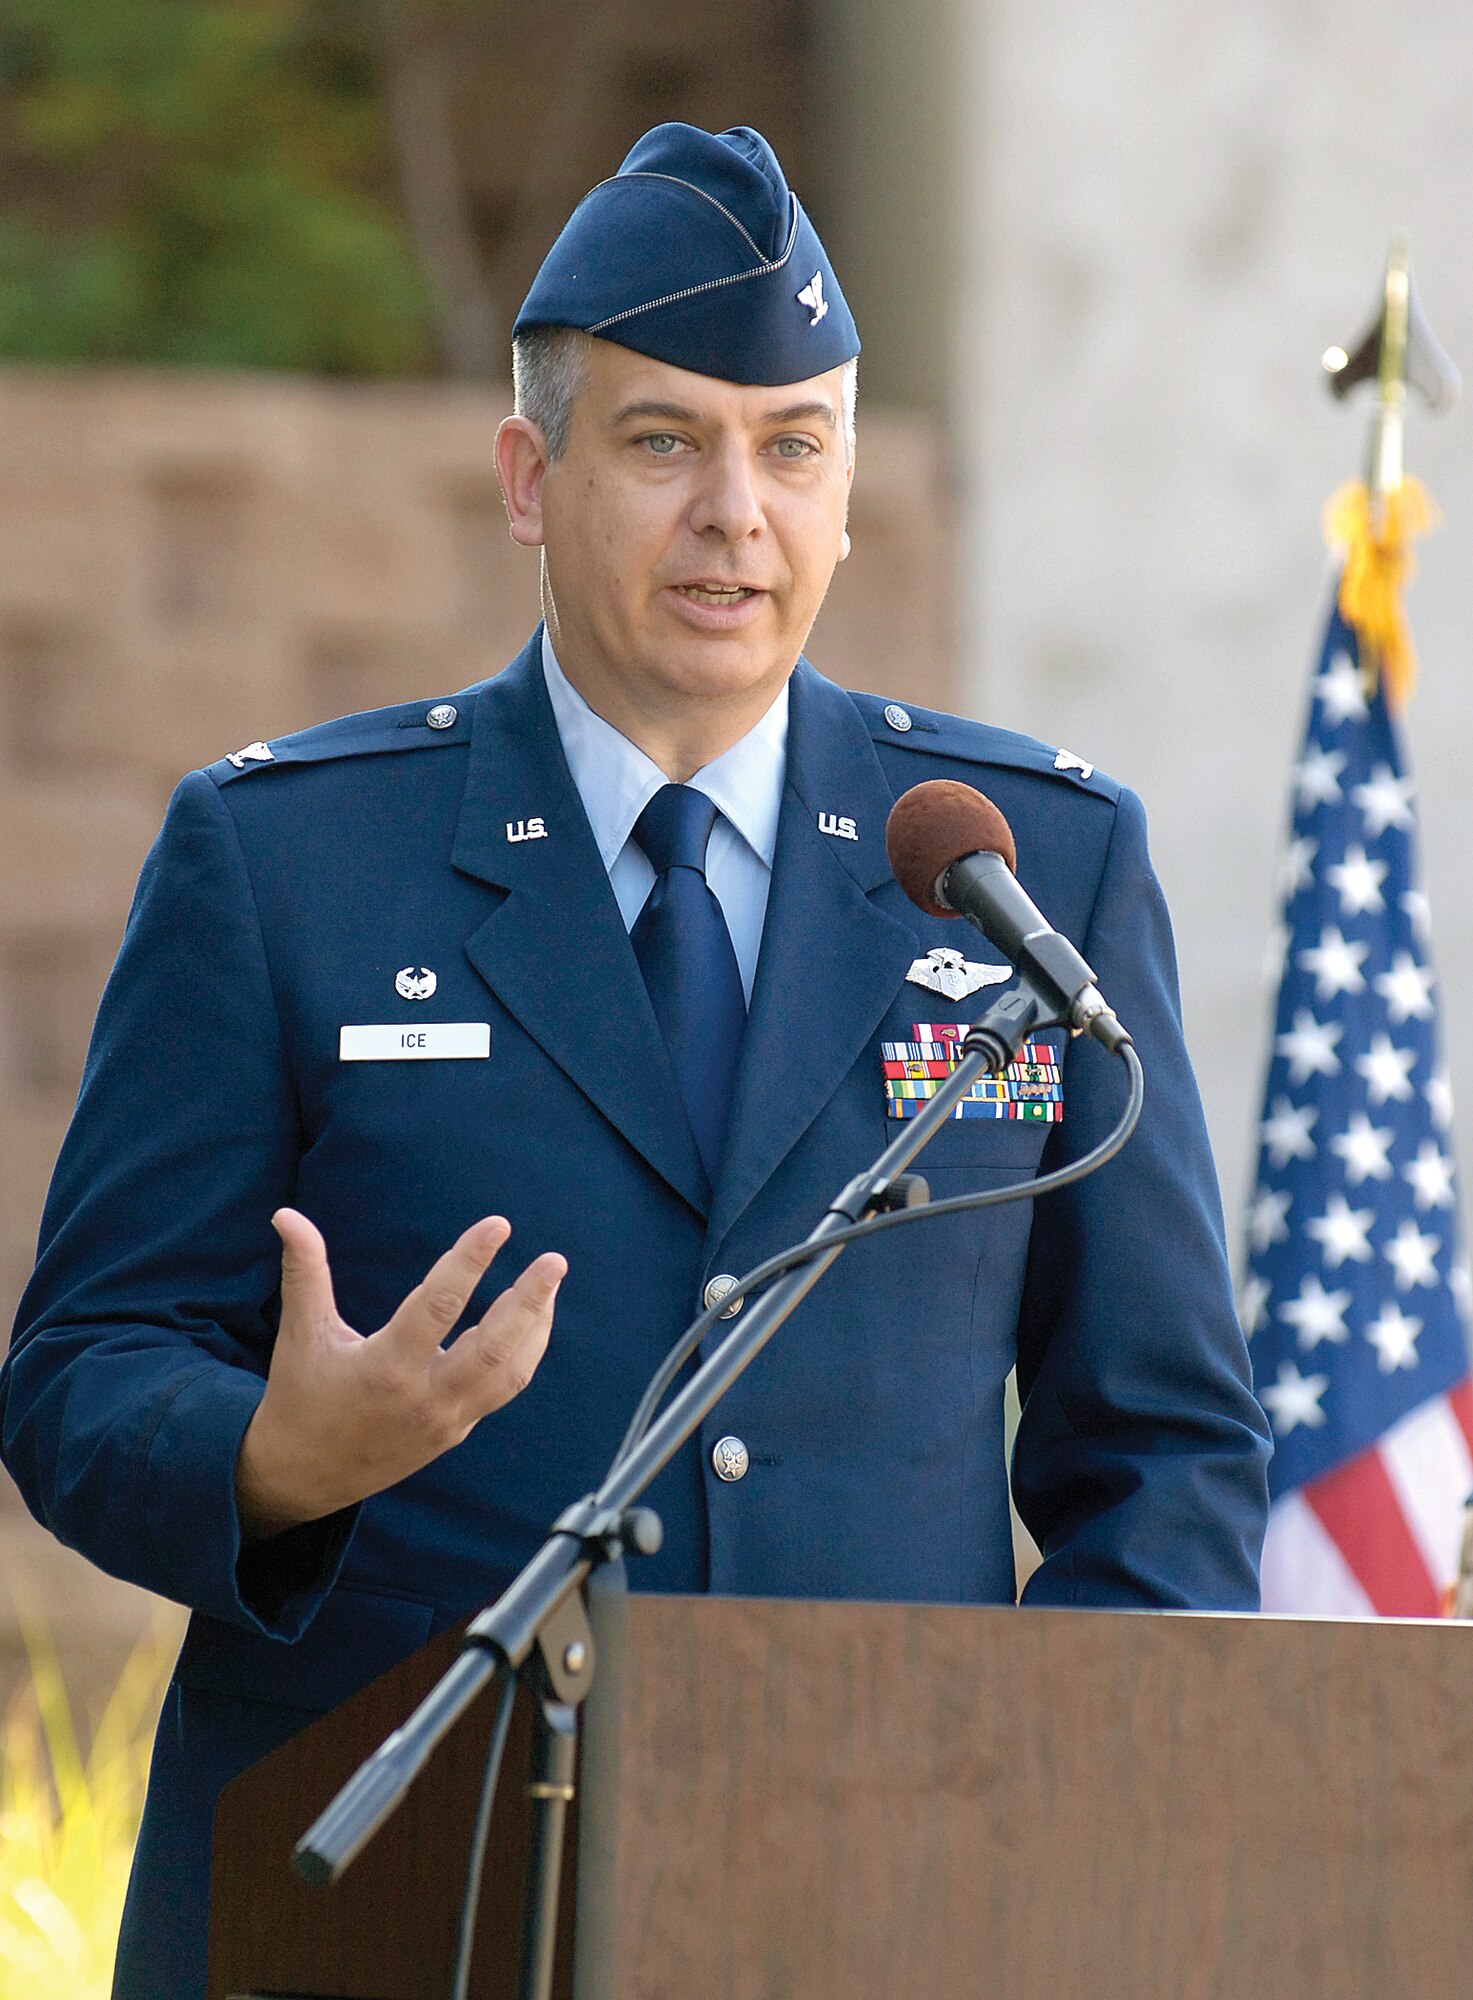 Col. James Ice accepted command of the 72nd Aerospace Medicine Squadron from outgoing commander Col. Craig Packard during a change of command ceremony July 7. (Air Force photo by Margo Wright)